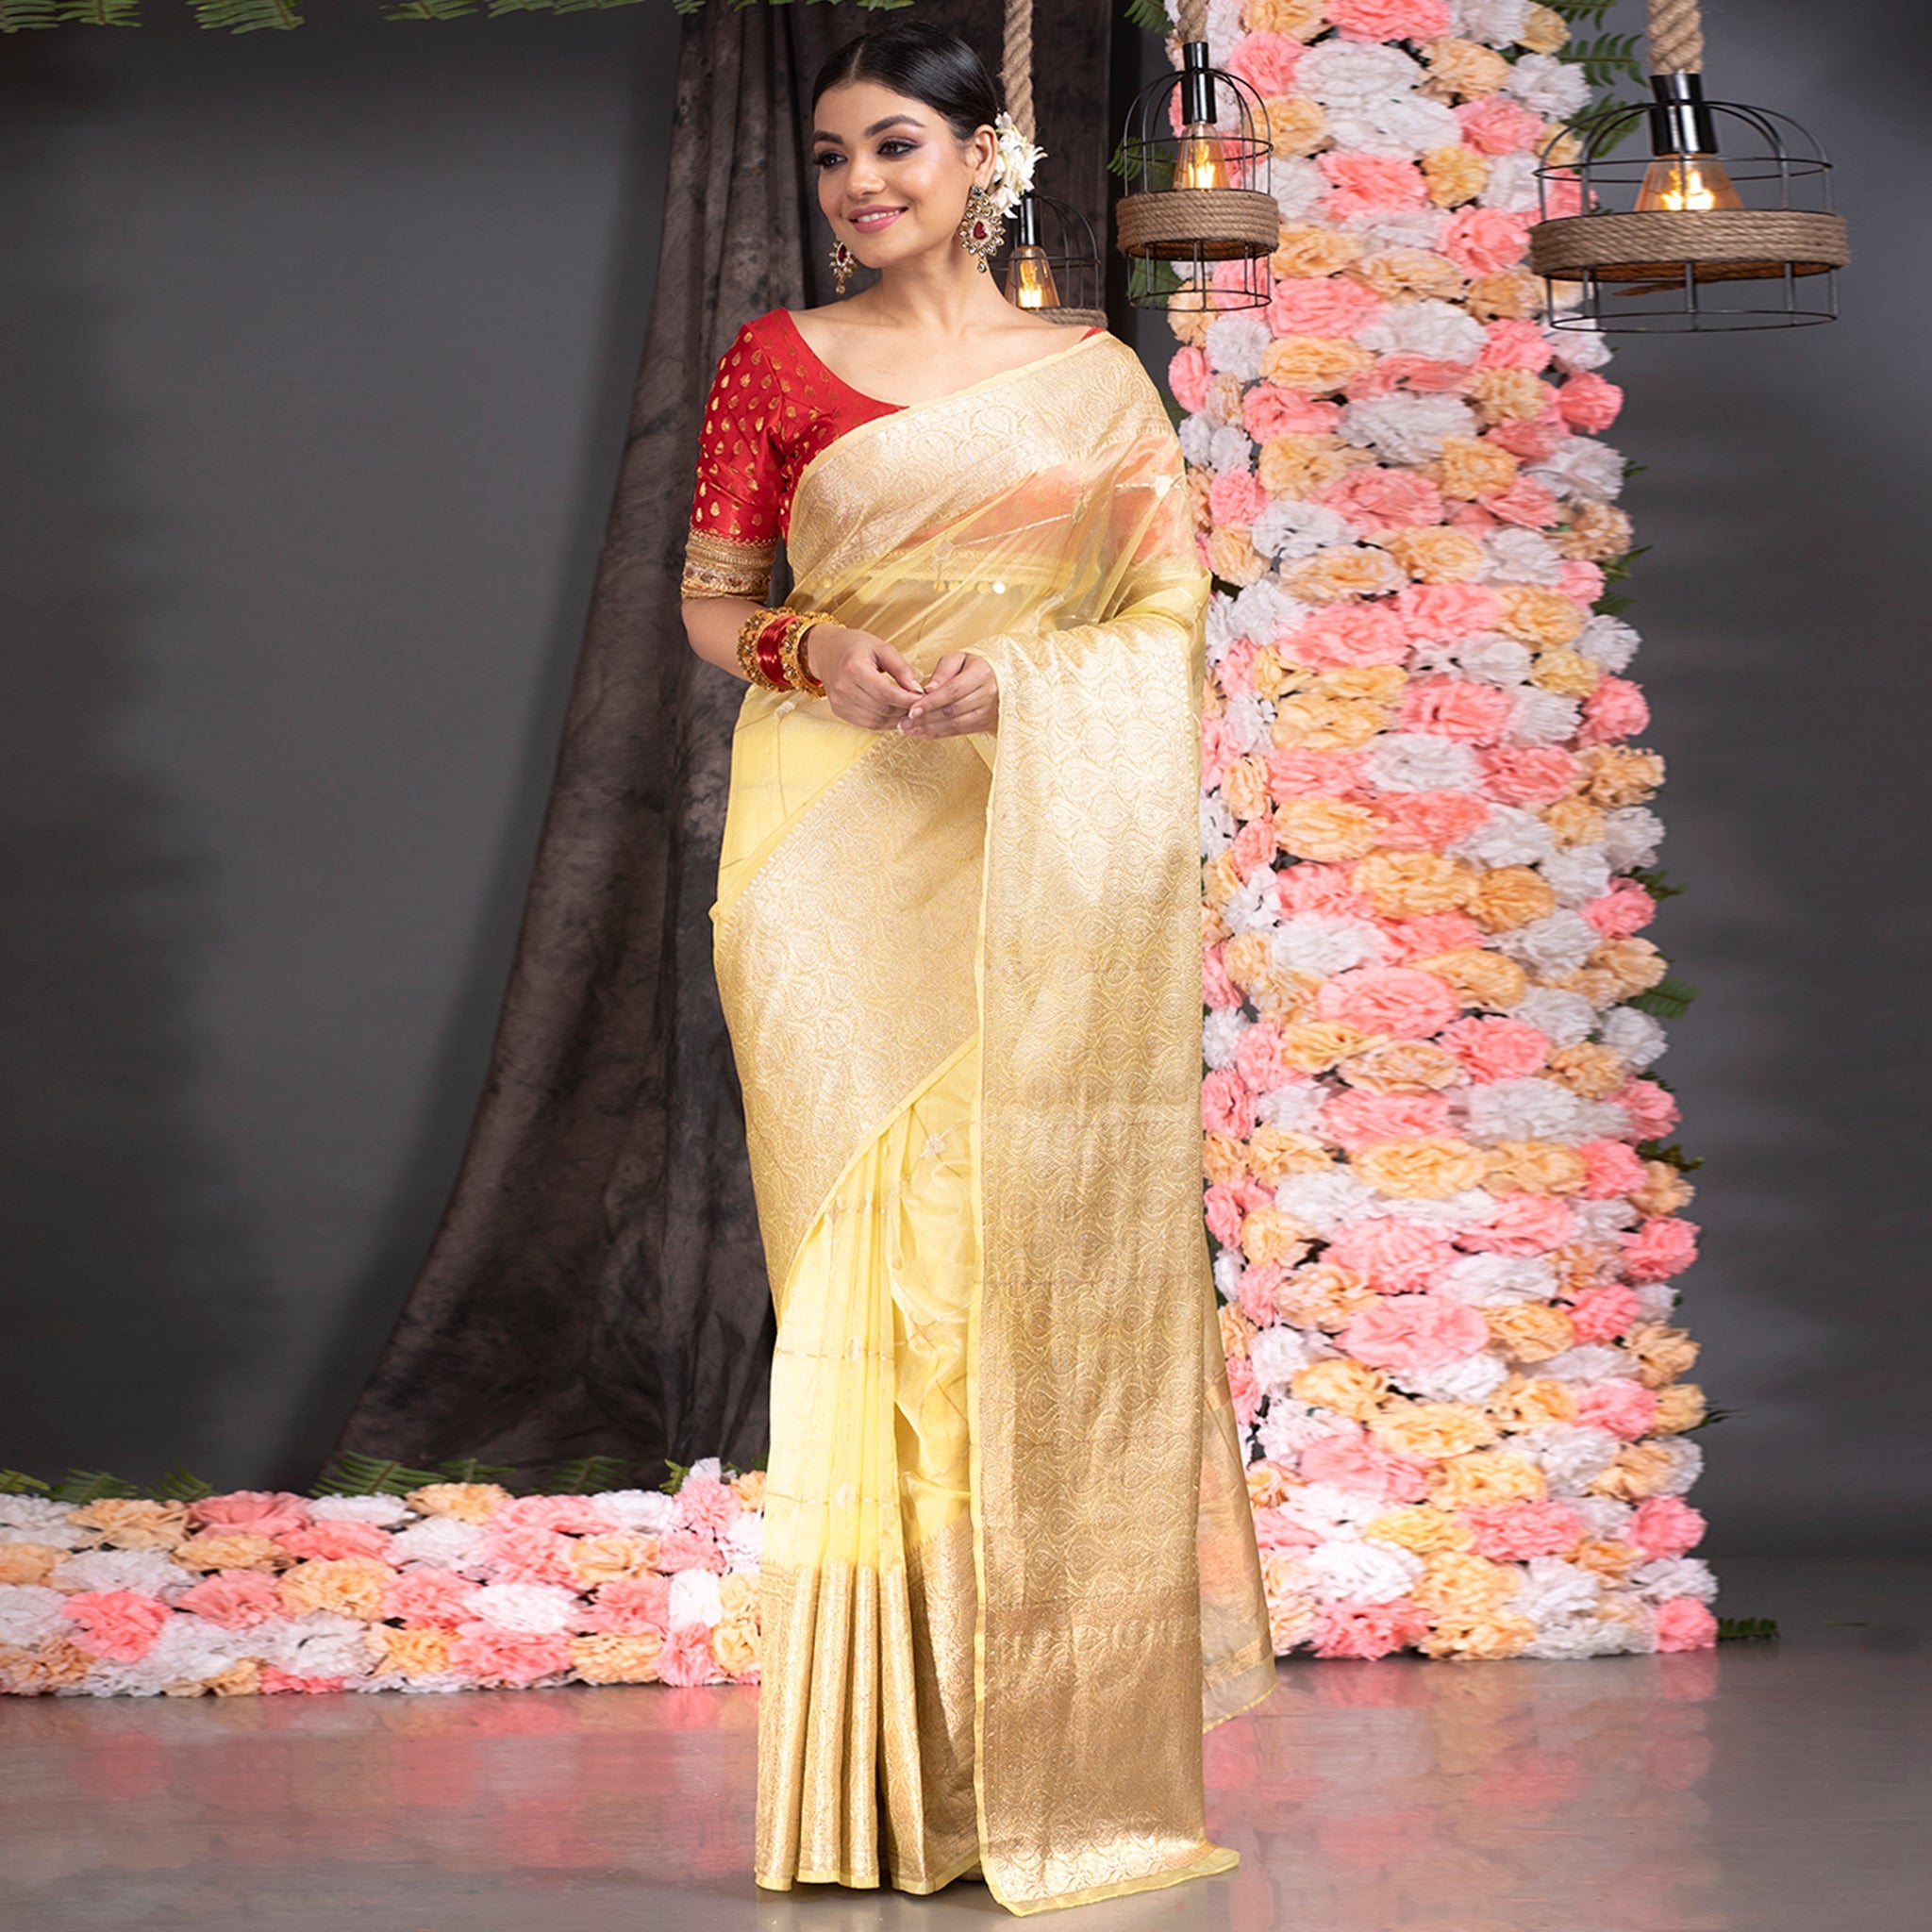 Women's Yellow Organza Saree With Square Motifs And Ambi Jaal Border - Boveee